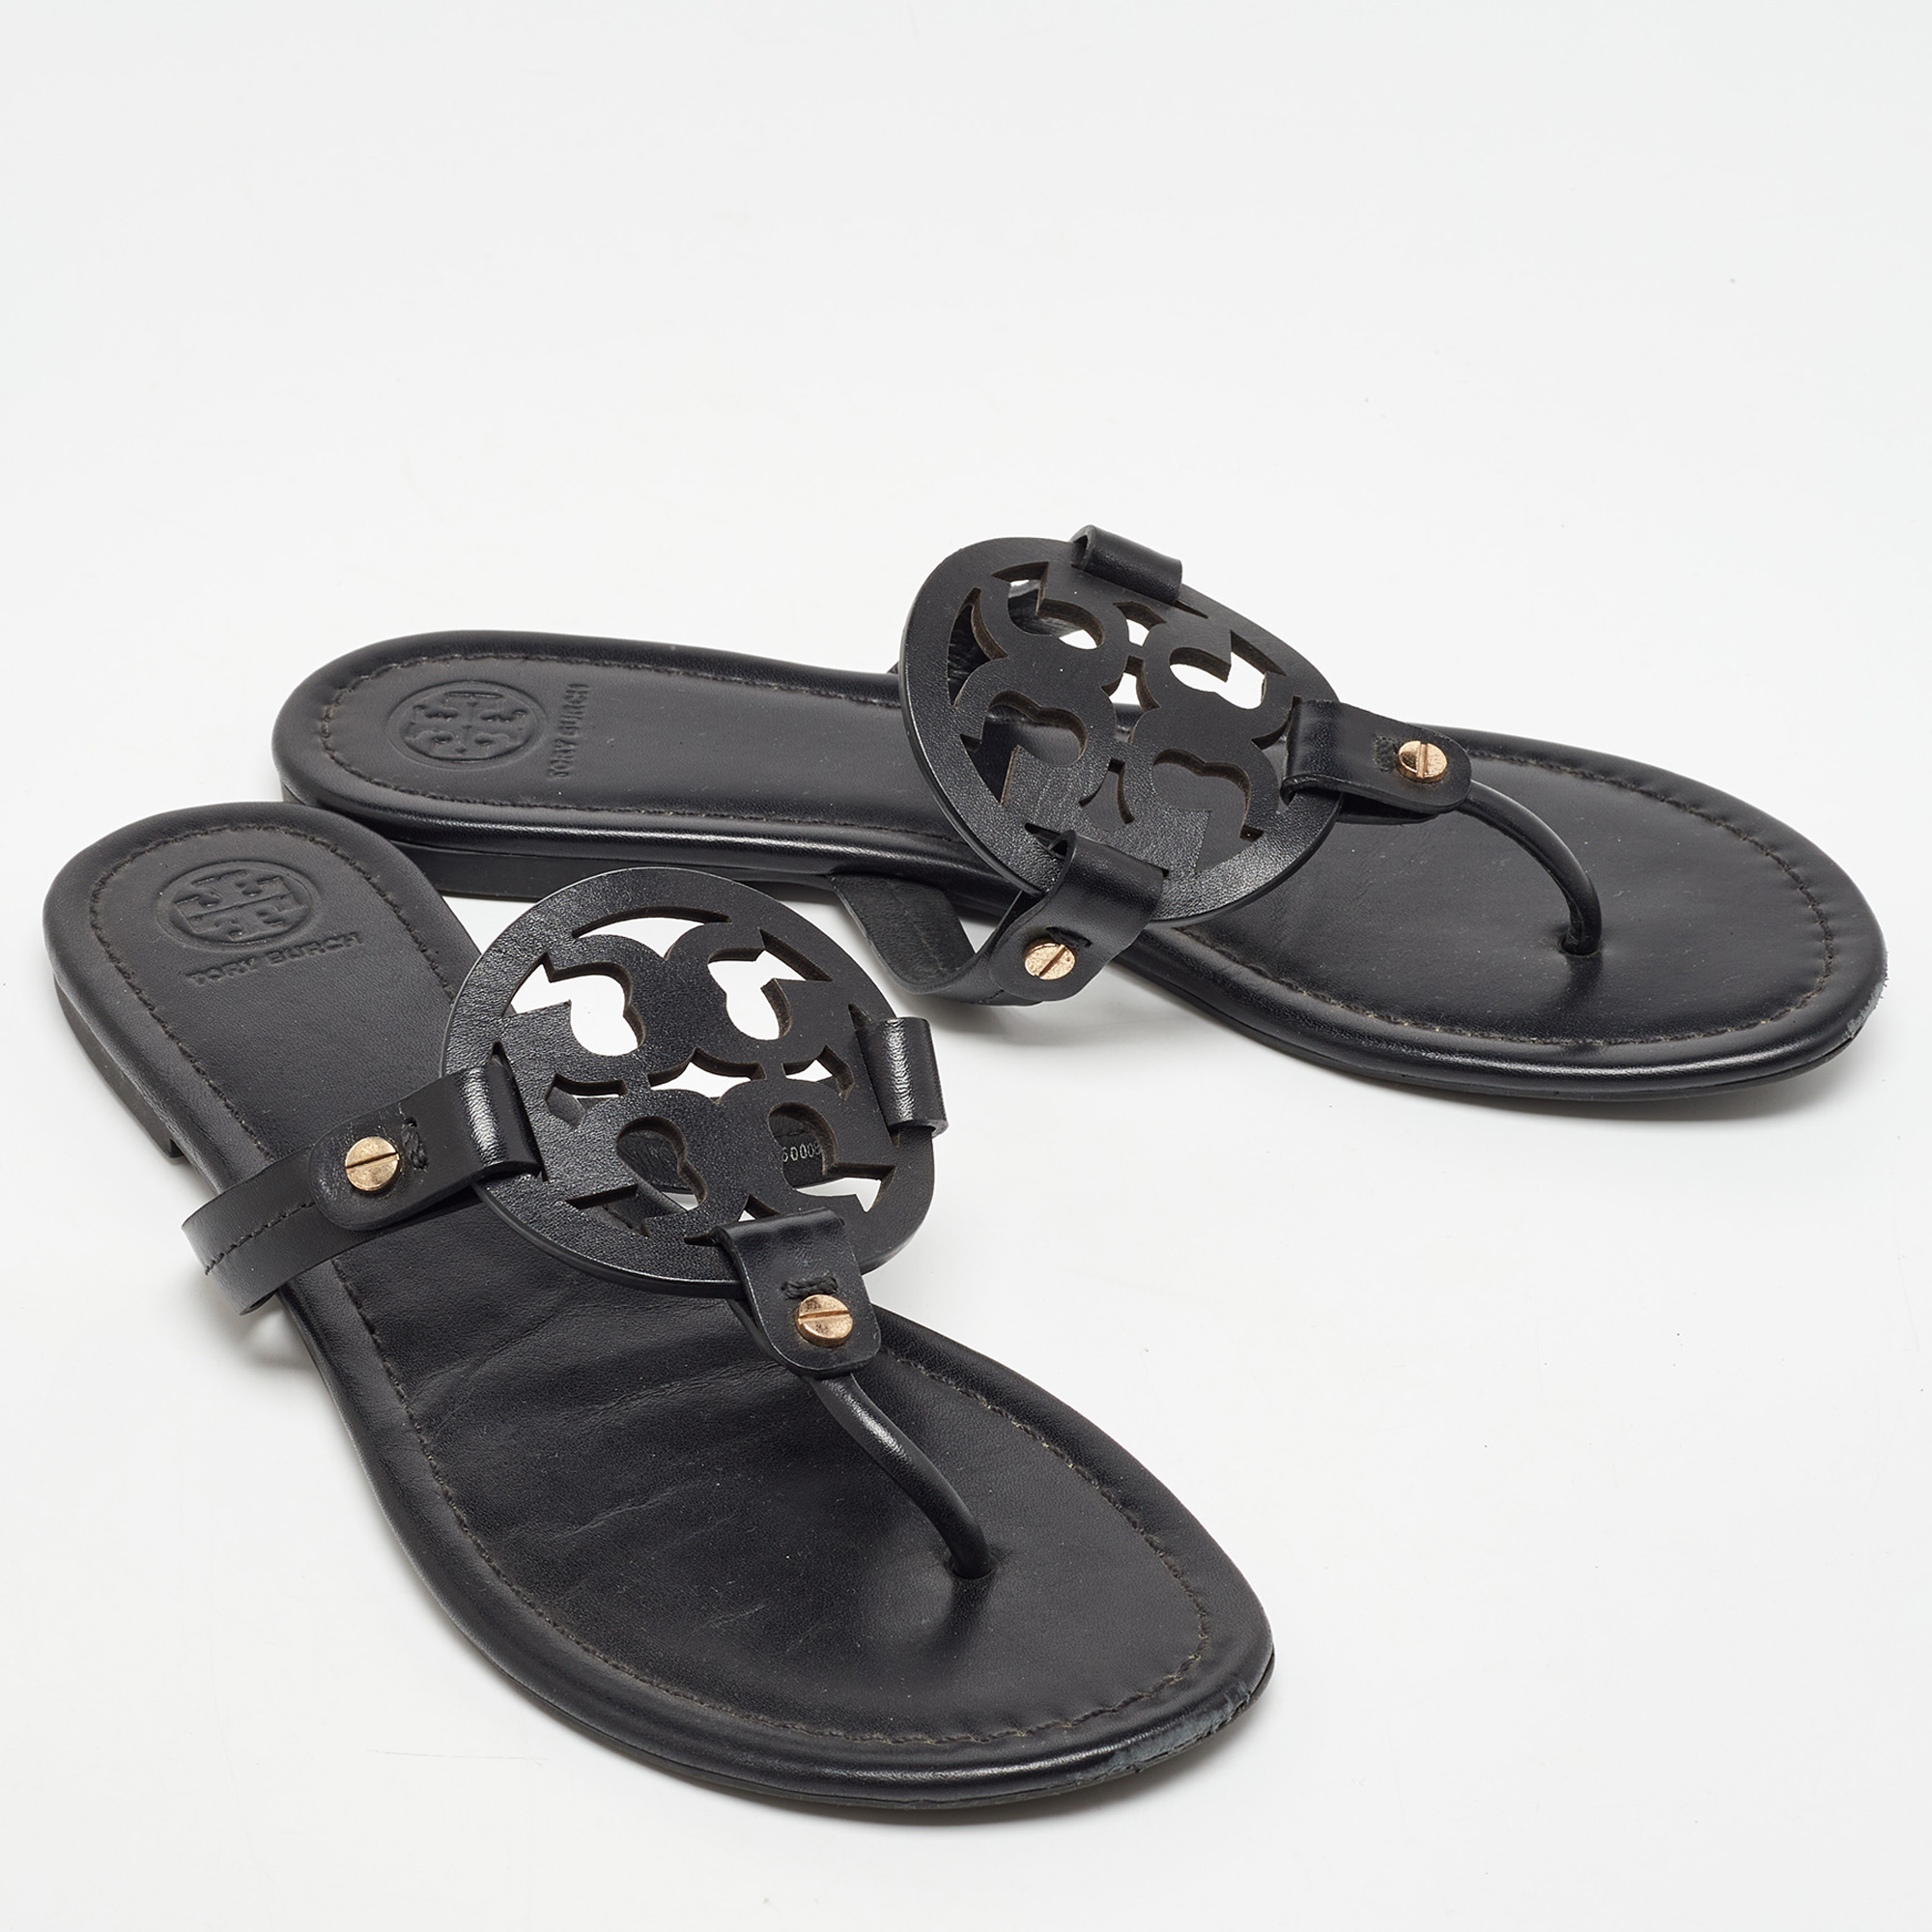 Tory Burch Black Leather Miller Flat Thong Sandals Size 39.5